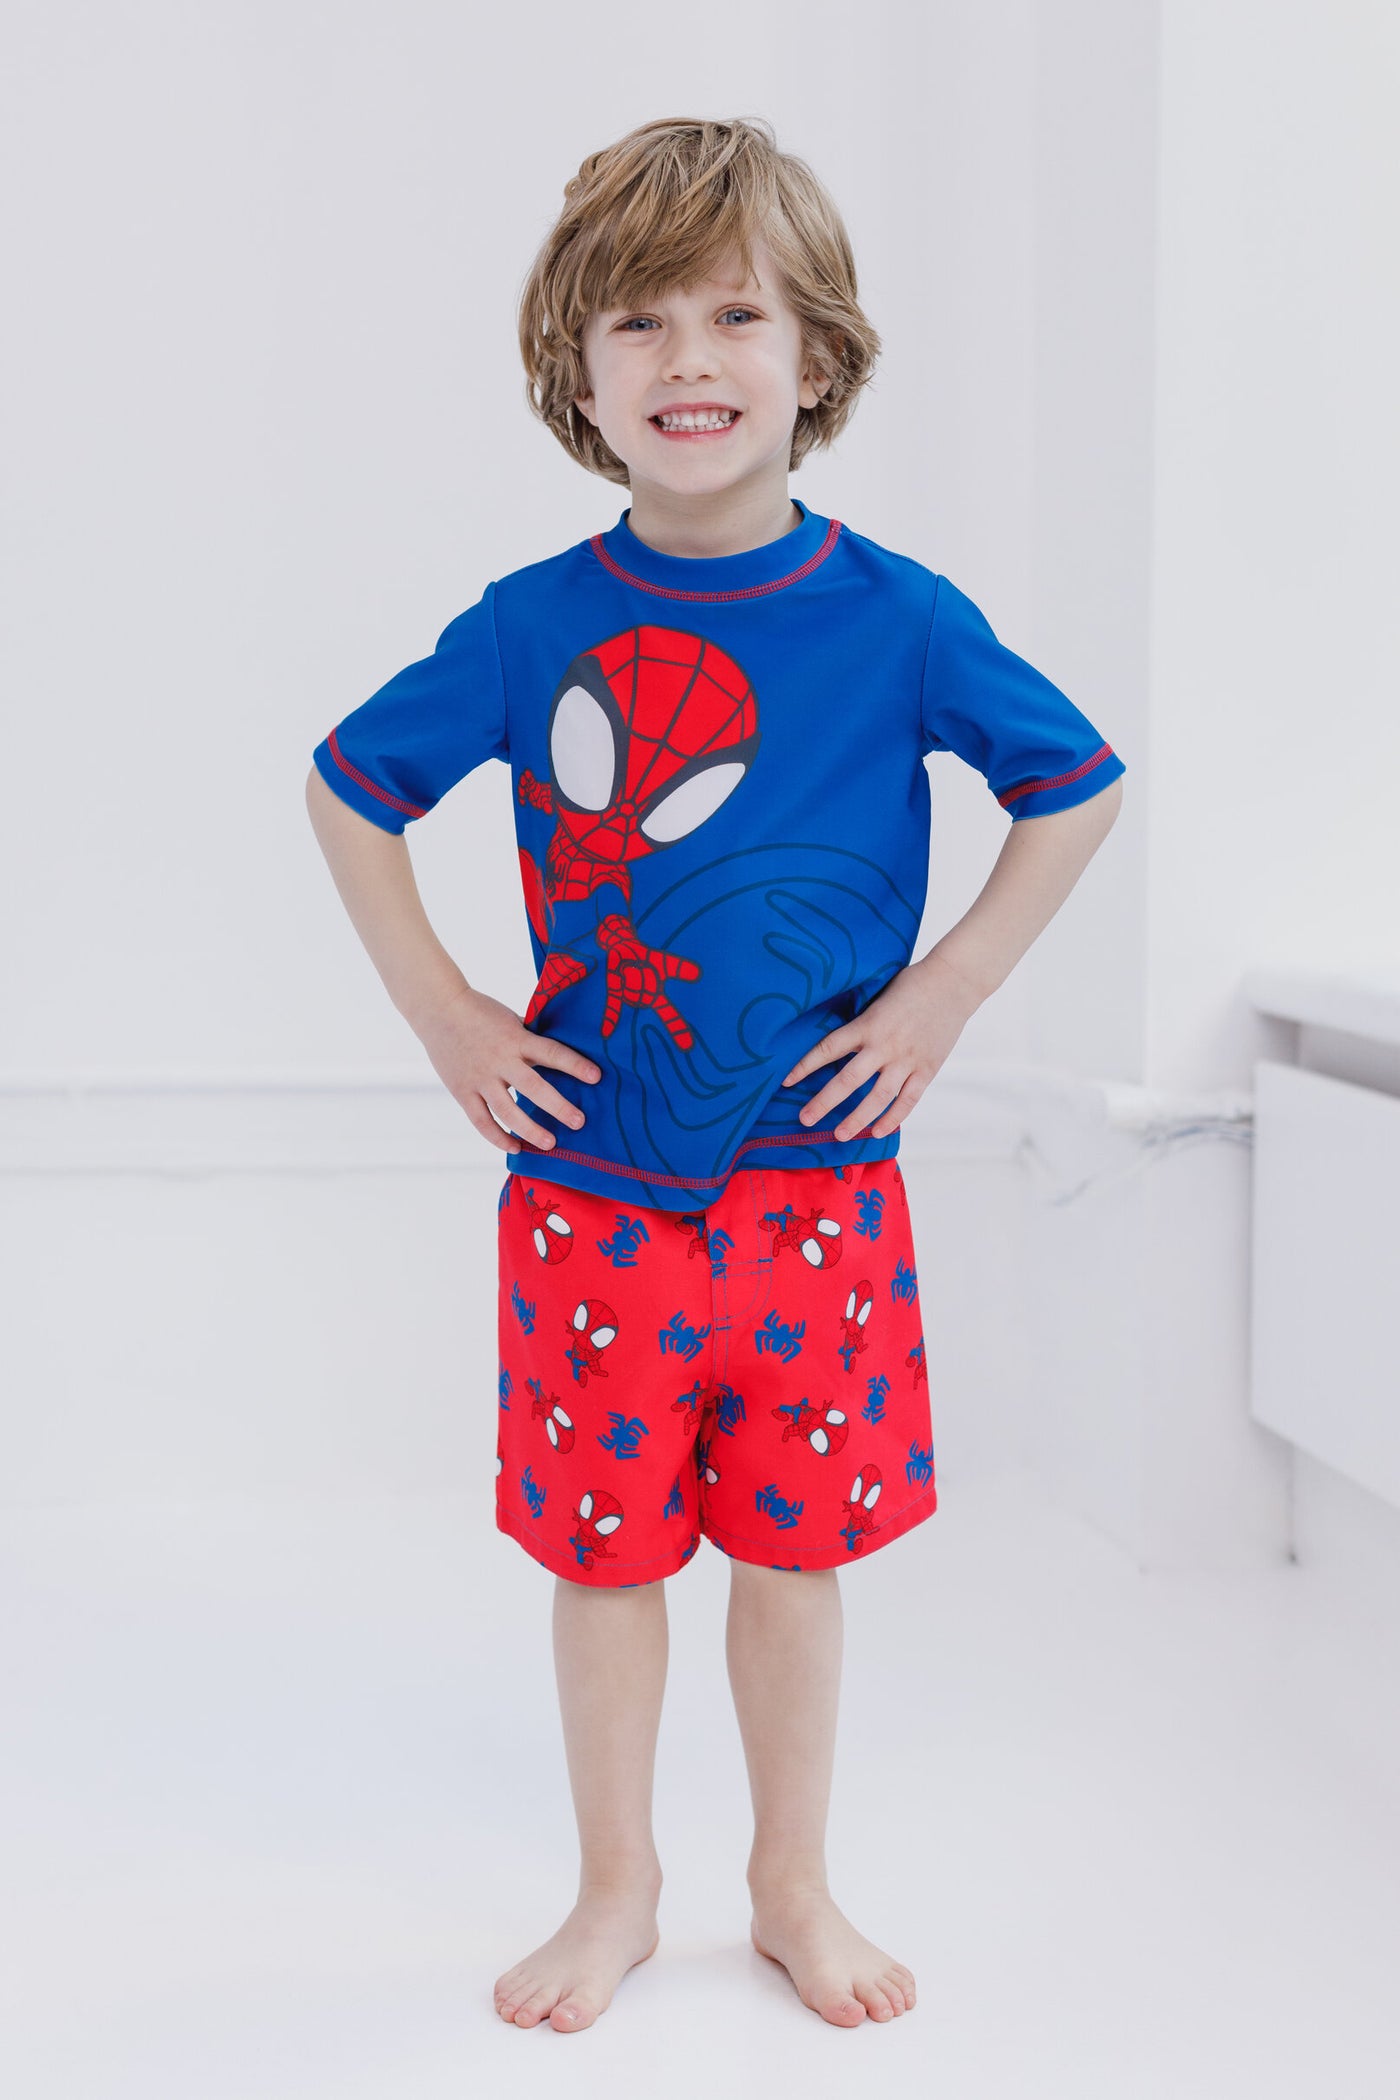 Marvel Spidey and His Amazing Friends Spider-Man UPF 50+ Rash Guard Swim Trunks Outfit Set